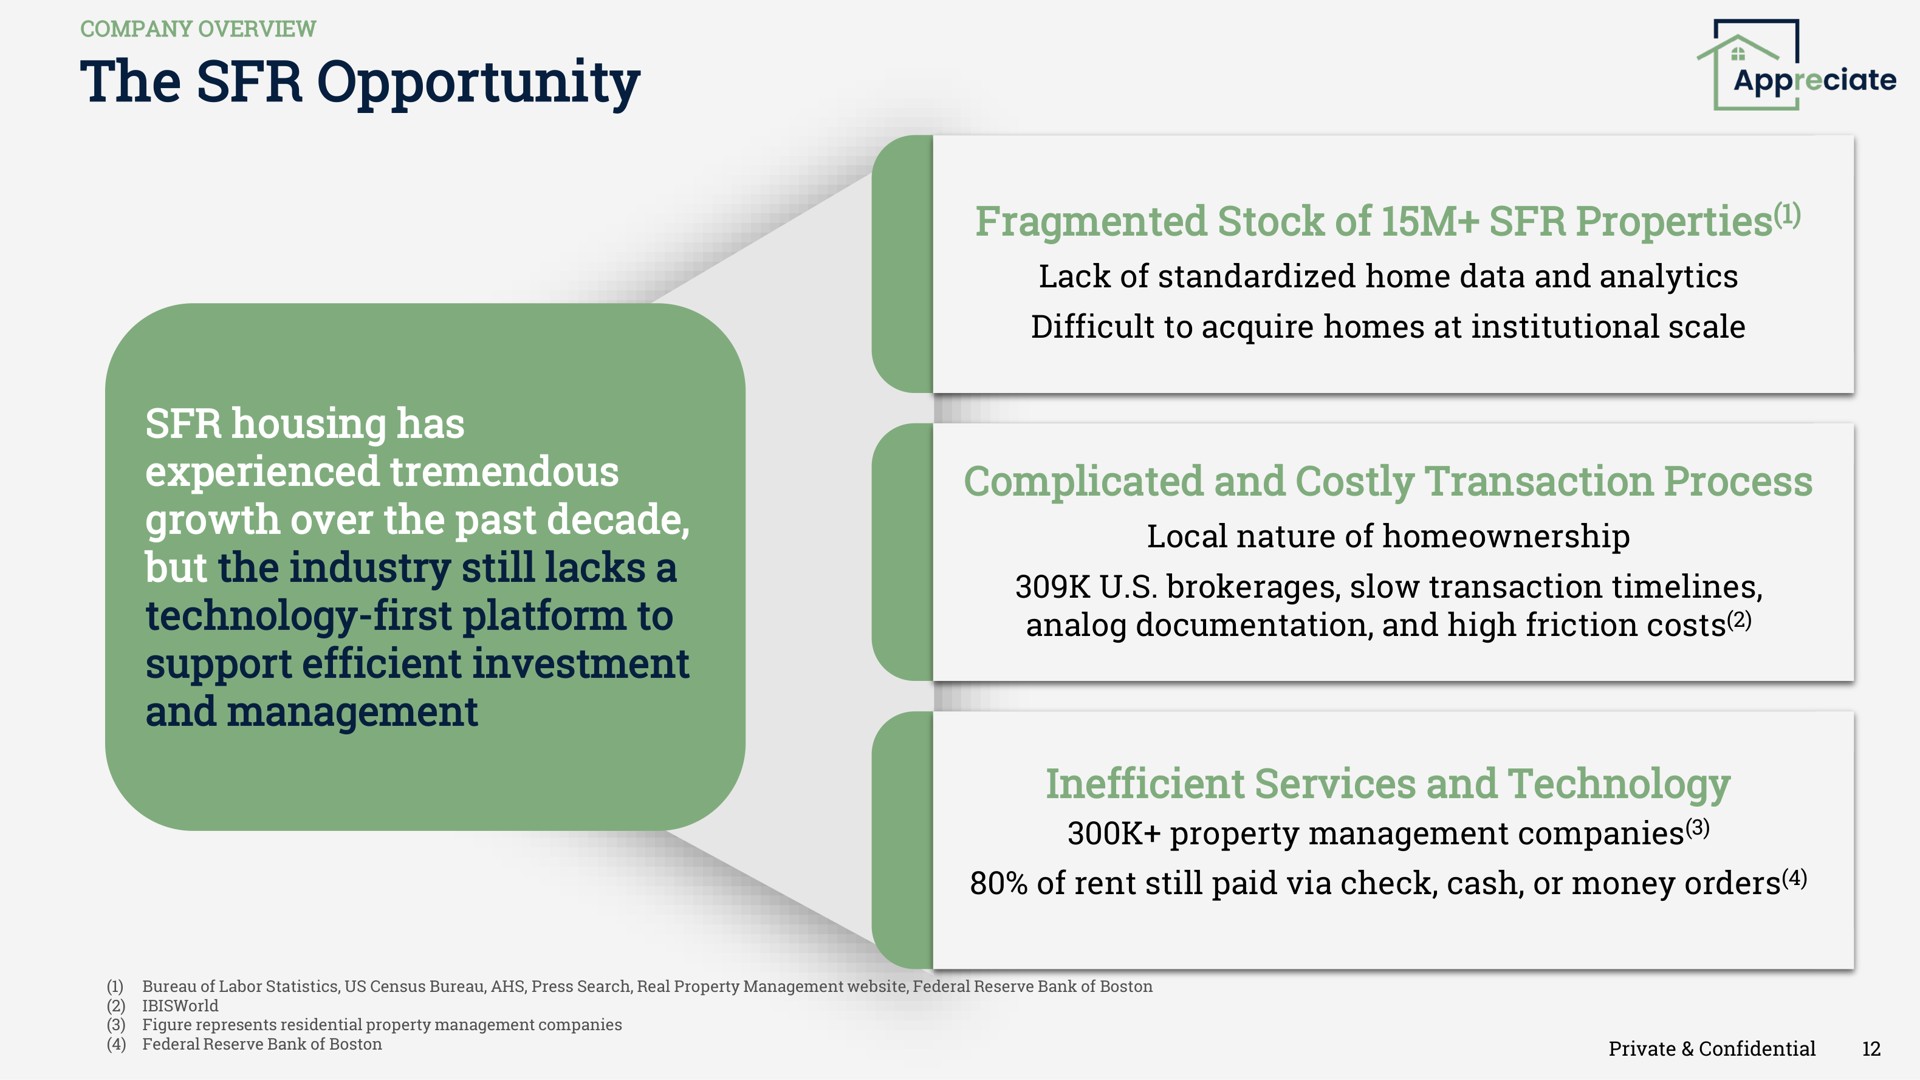 the opportunity housing has experienced tremendous growth over the past decade but the industry still lacks a technology first platform to support efficient investment and management fragmented stock of properties complicated and costly transaction process inefficient services and technology | Appreciate